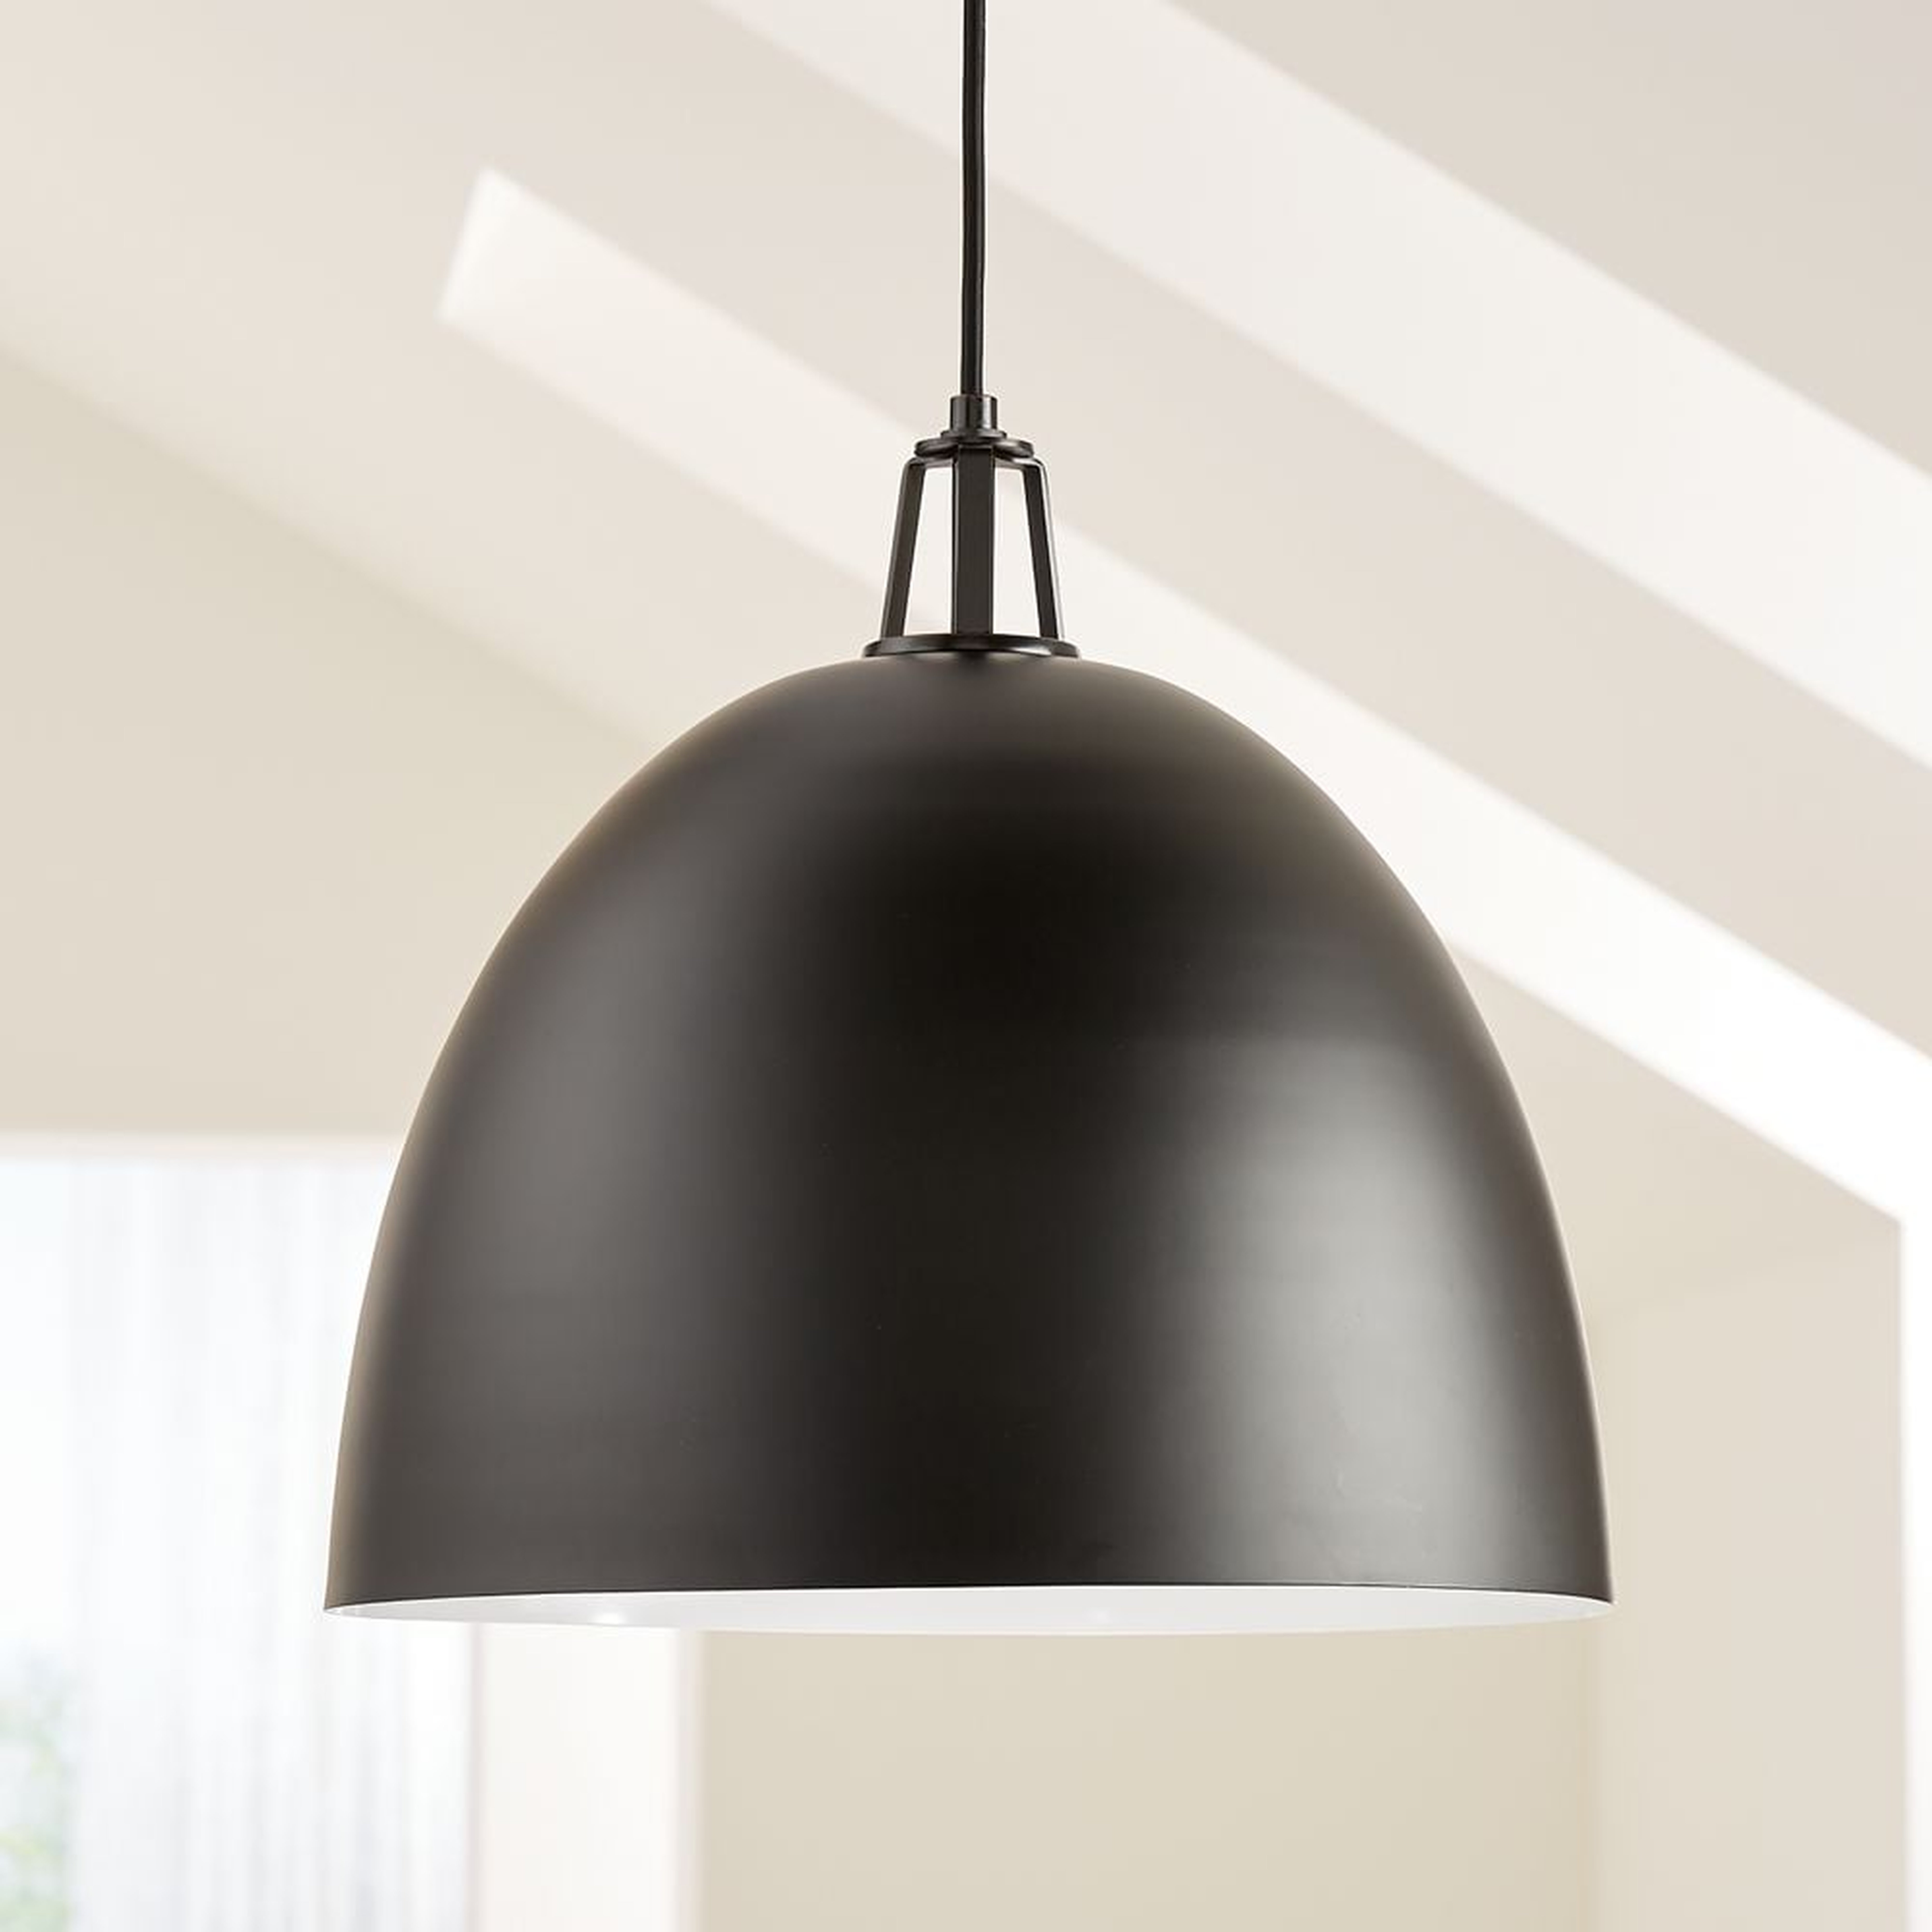 Maddox Black Dome Pendant Large with Black Socket - Crate and Barrel